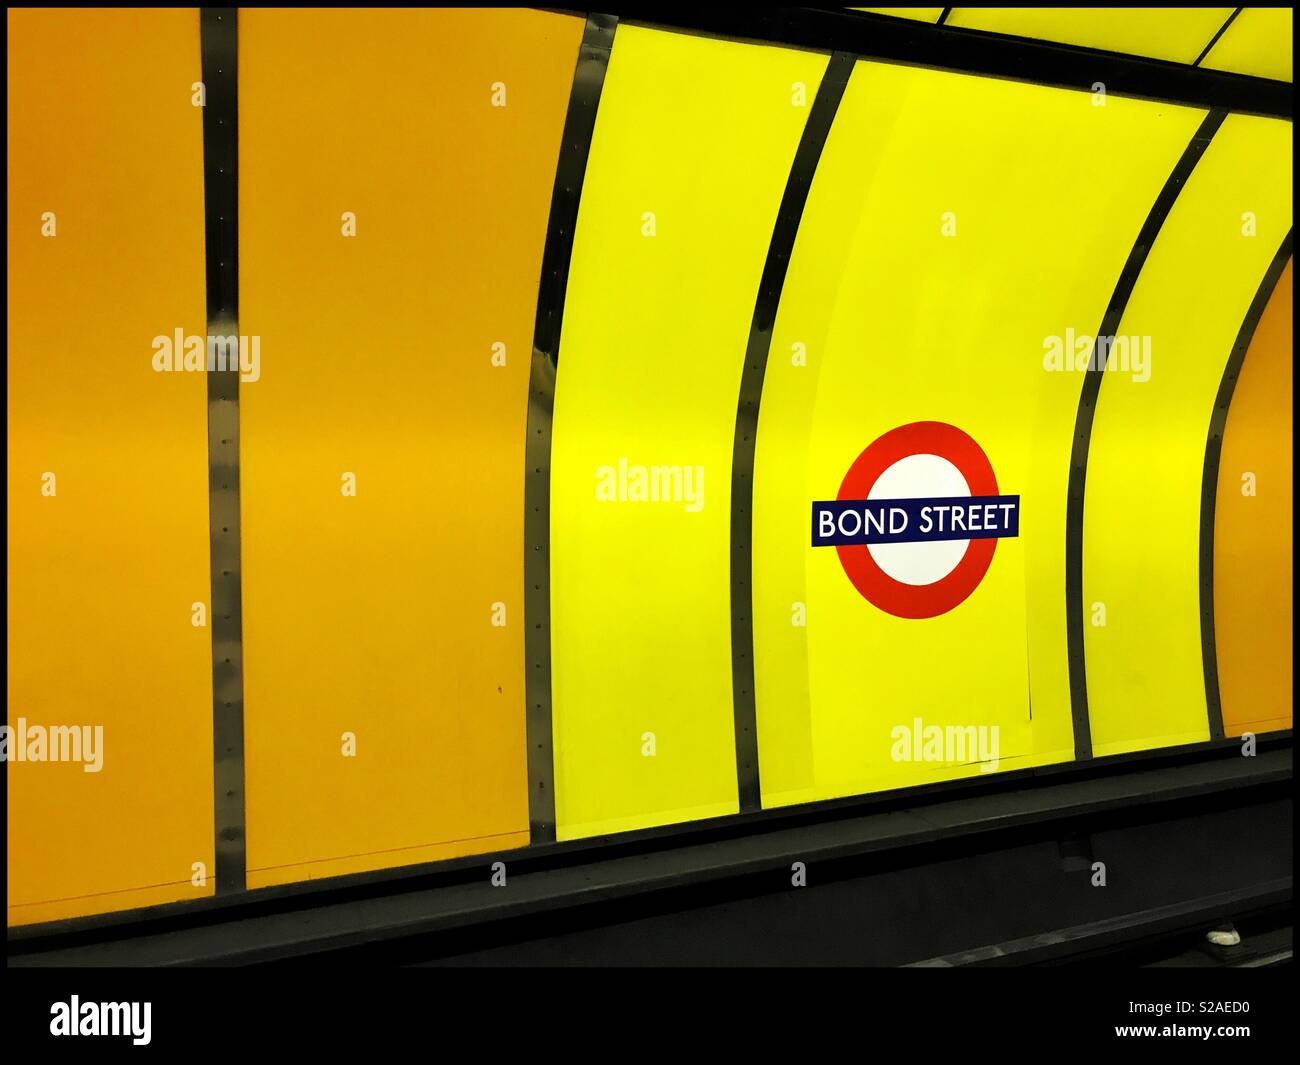 Colourful Signage on the London Underground (Tube) System indicating this station is “BOND STREET.” This station is on the Central & Jubilee Lines. Photo Credit - © COLIN HOSKINS. Stock Photo